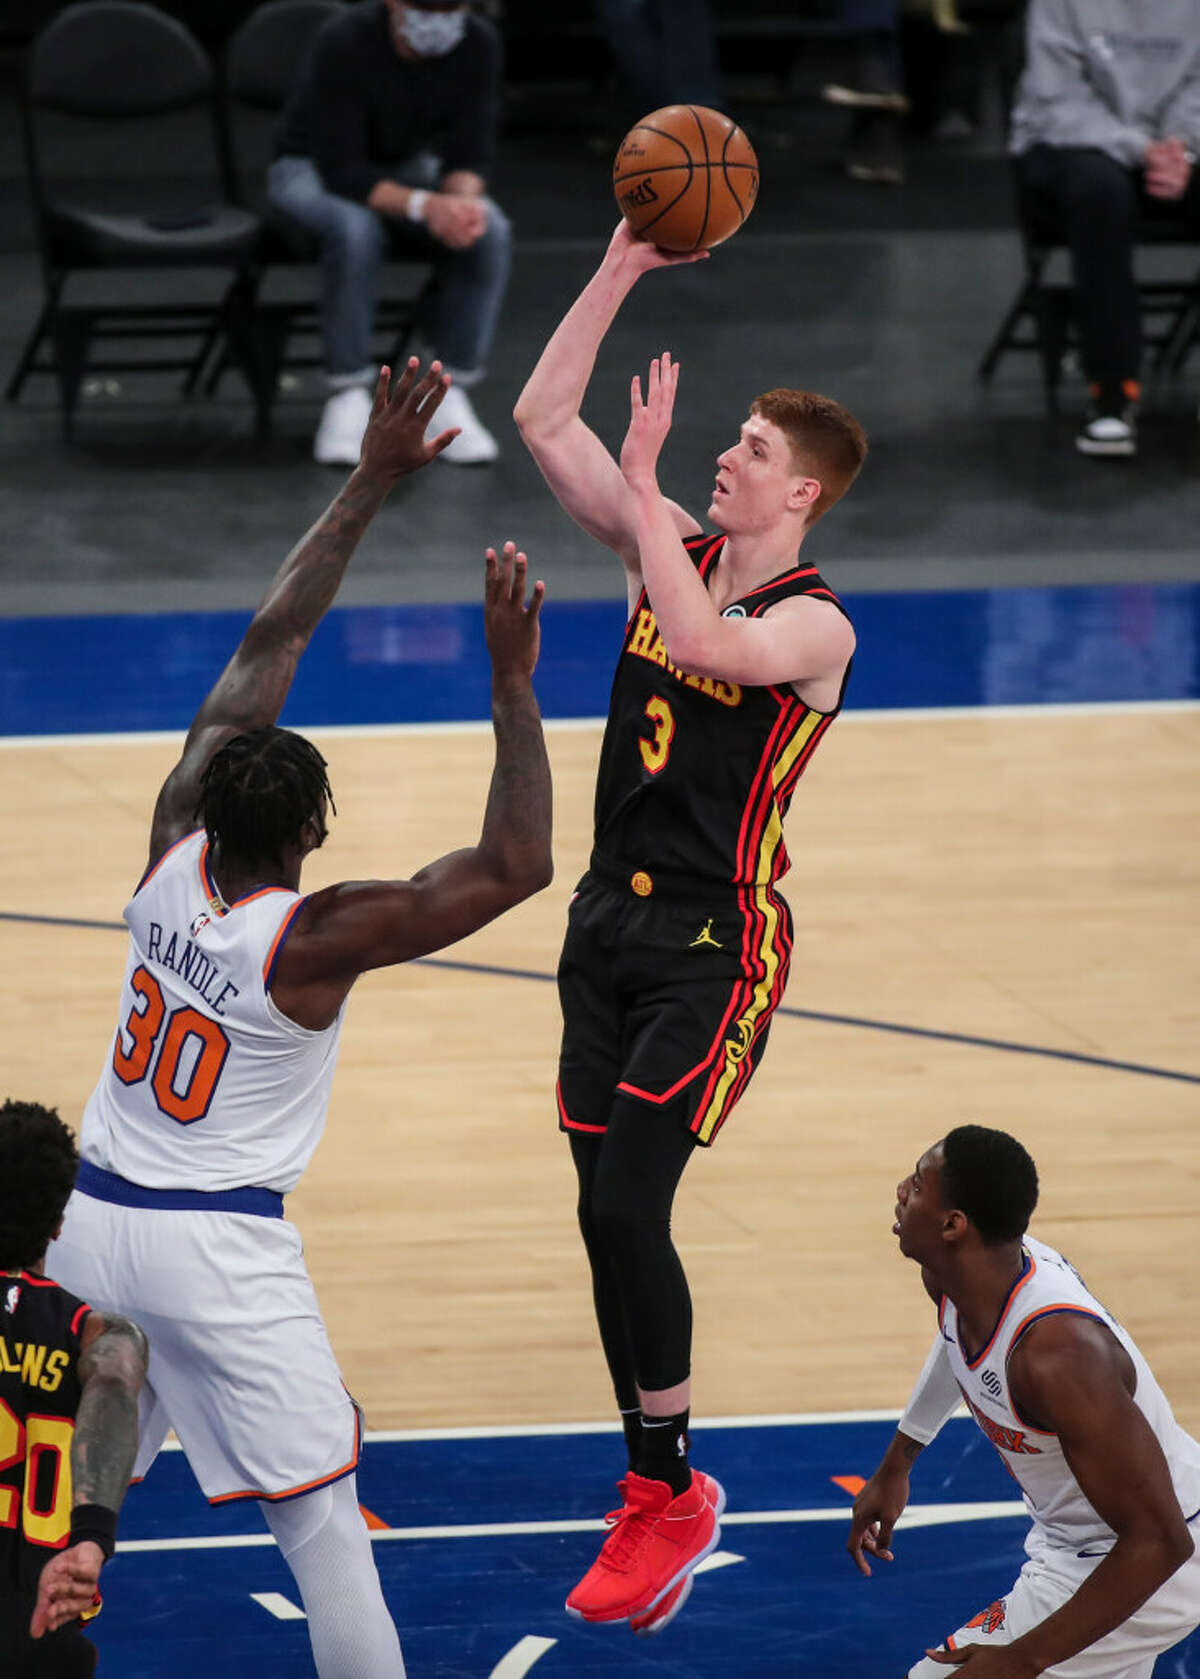 Atlanta Hawks guard Kevin Huerter, a Shenendehowa graduate, shoots over New York Knicks forward Julius Randle earlier this season. They'll meet in Game 1 of an NBA playoffs first-round series on May 23, 2021 at Madison Square Garden. (Associated Press)